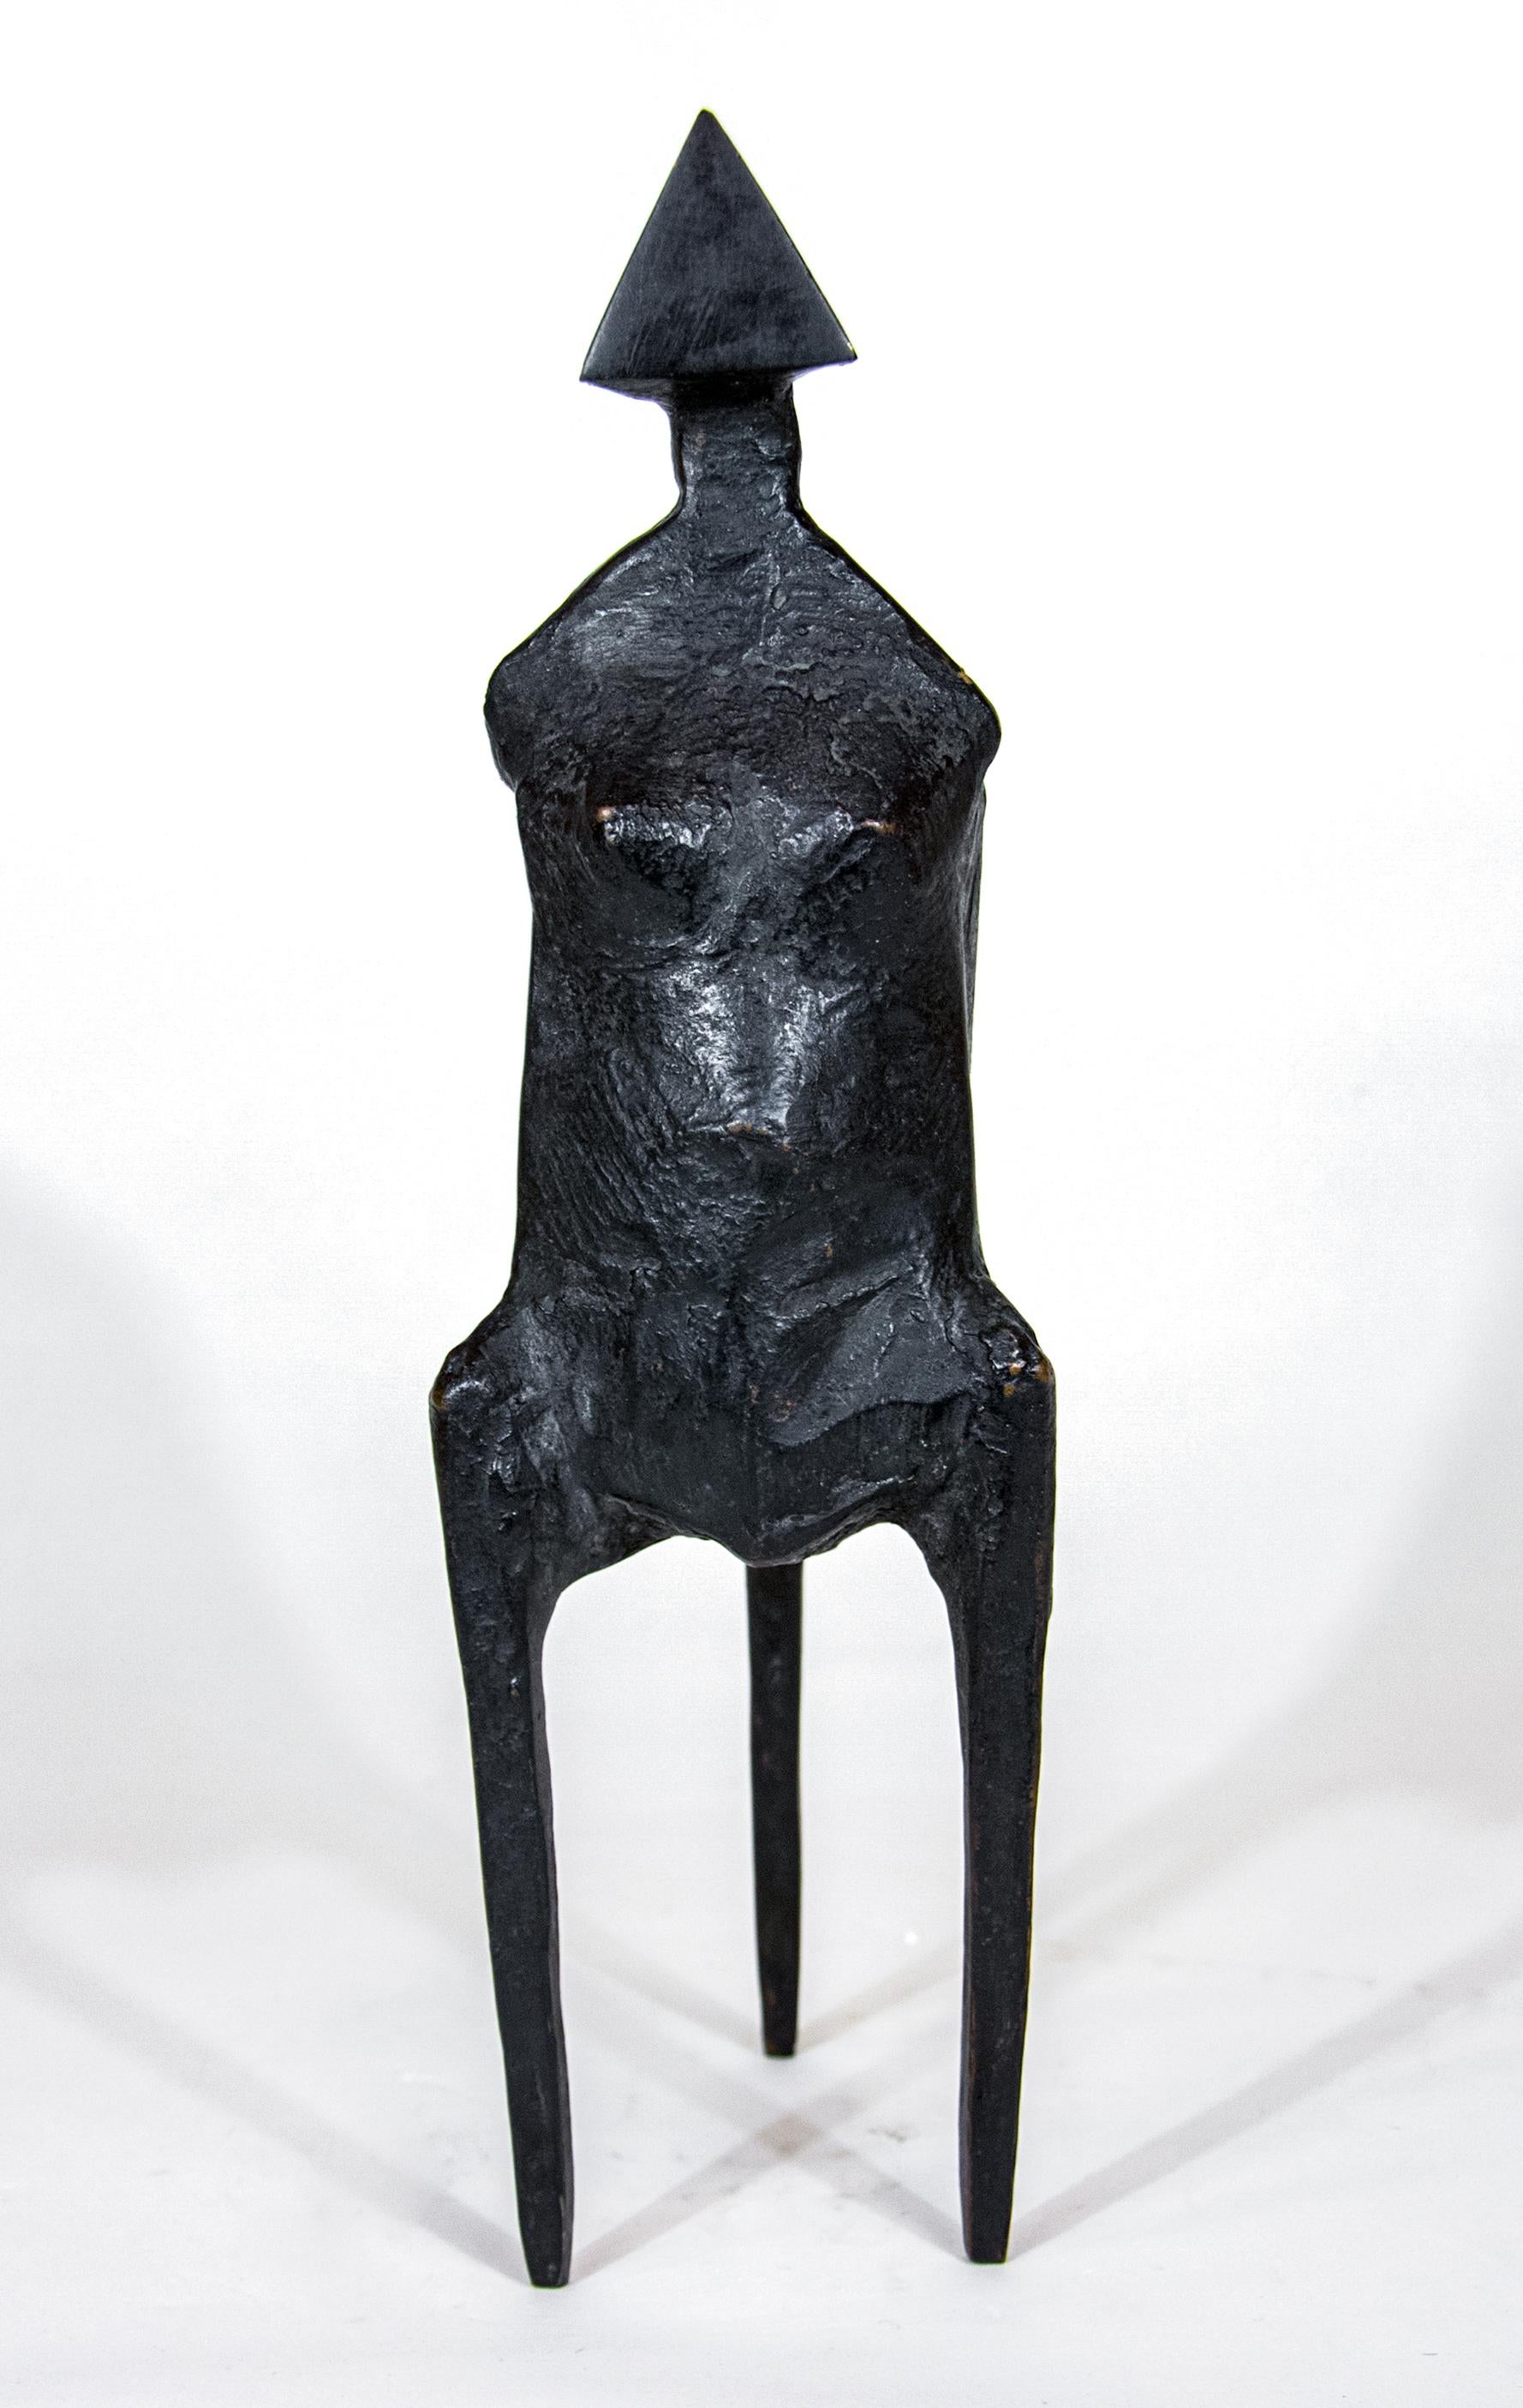 Lynn Chadwick Figurative Sculpture - Standing Woman No 1 - small, expressionist, abstract, female, bronze sculpture